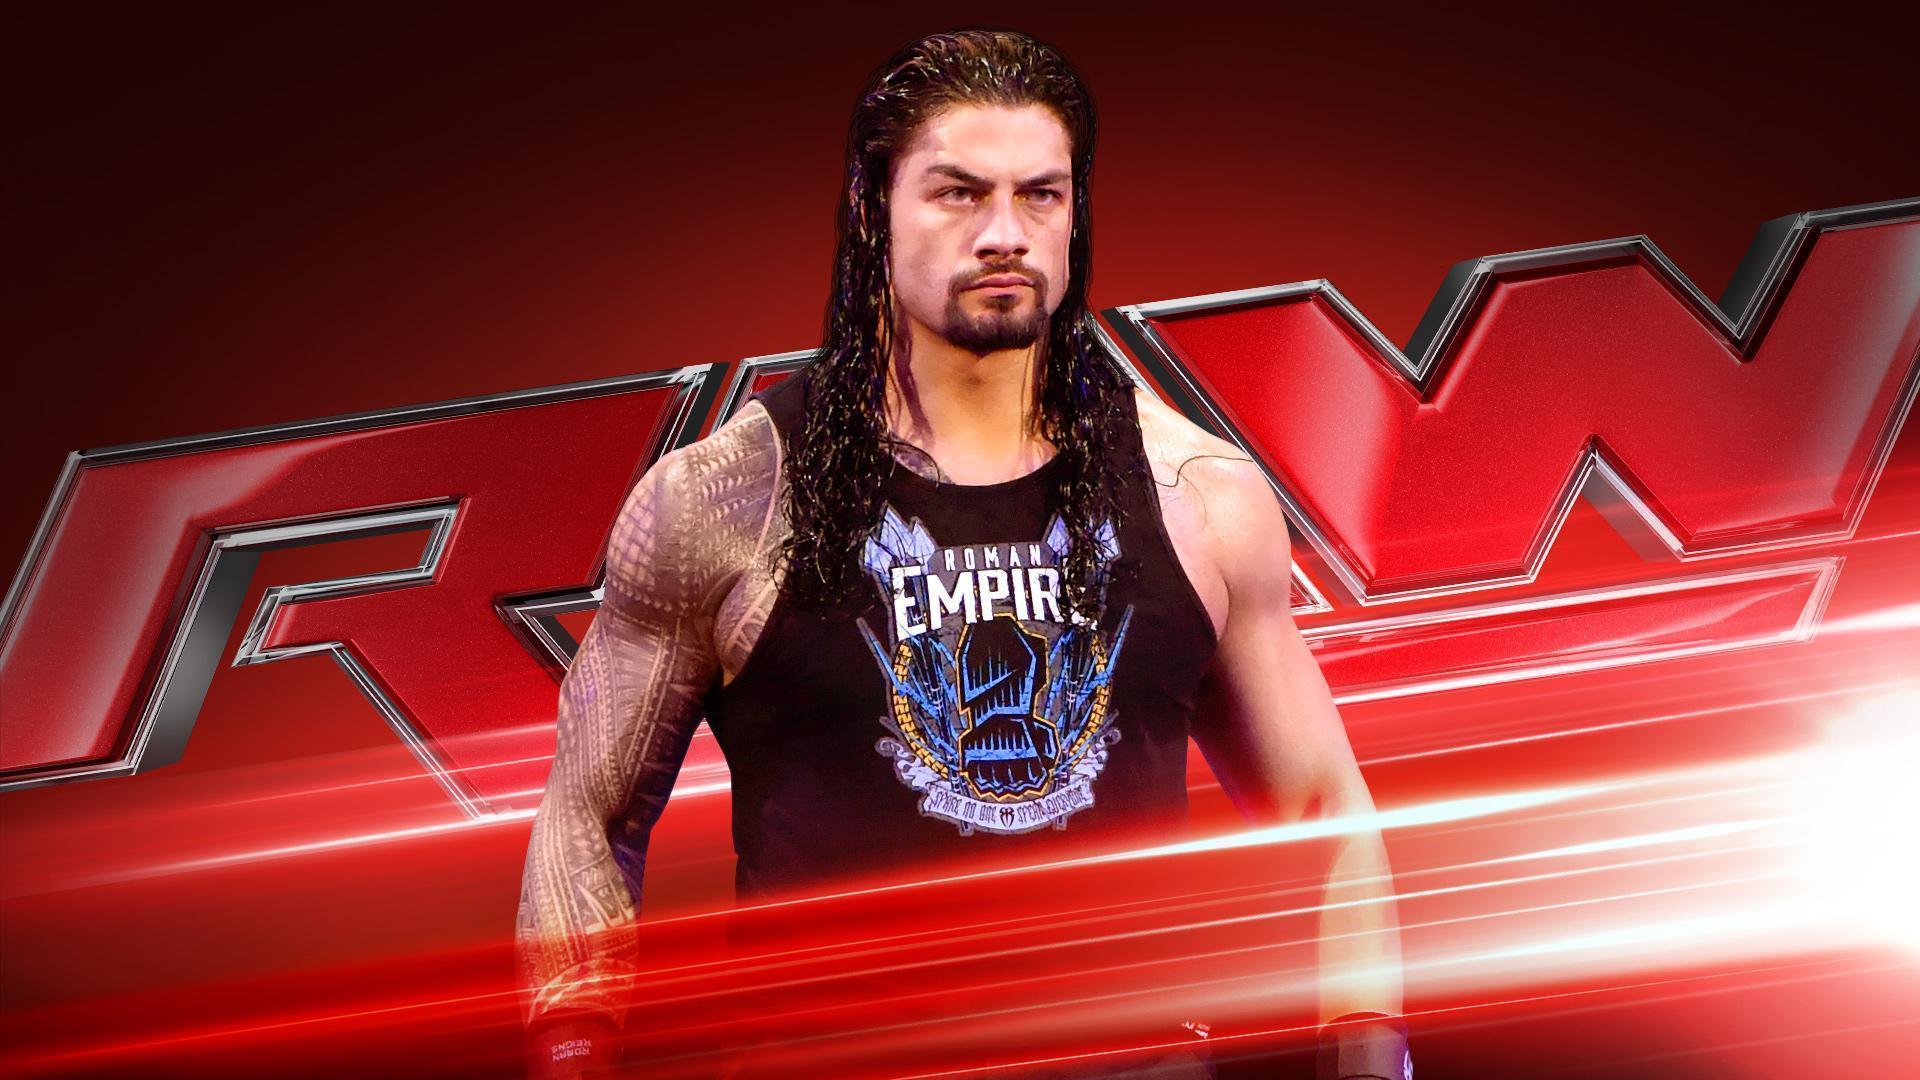 WWE Monday Night Raw Preview for 03.21.2016: Roman Reigns